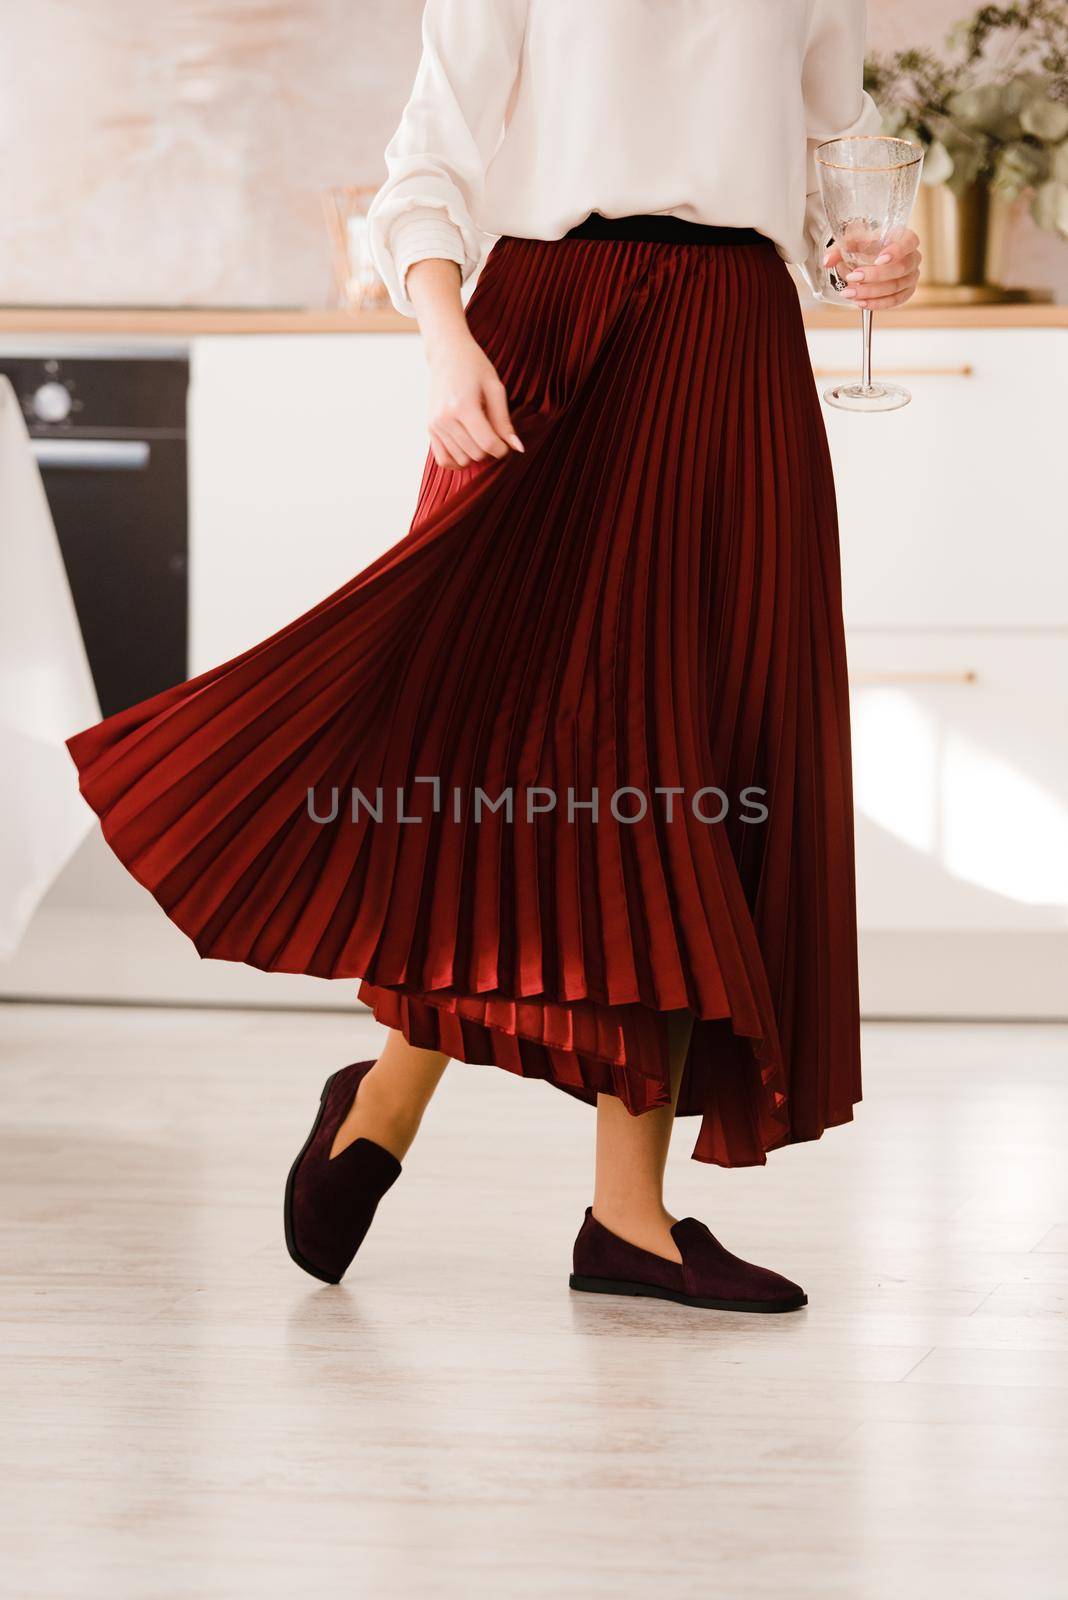 Photo of women's legs in a stylish suede burgundy loafers. Woman wearing red skirt